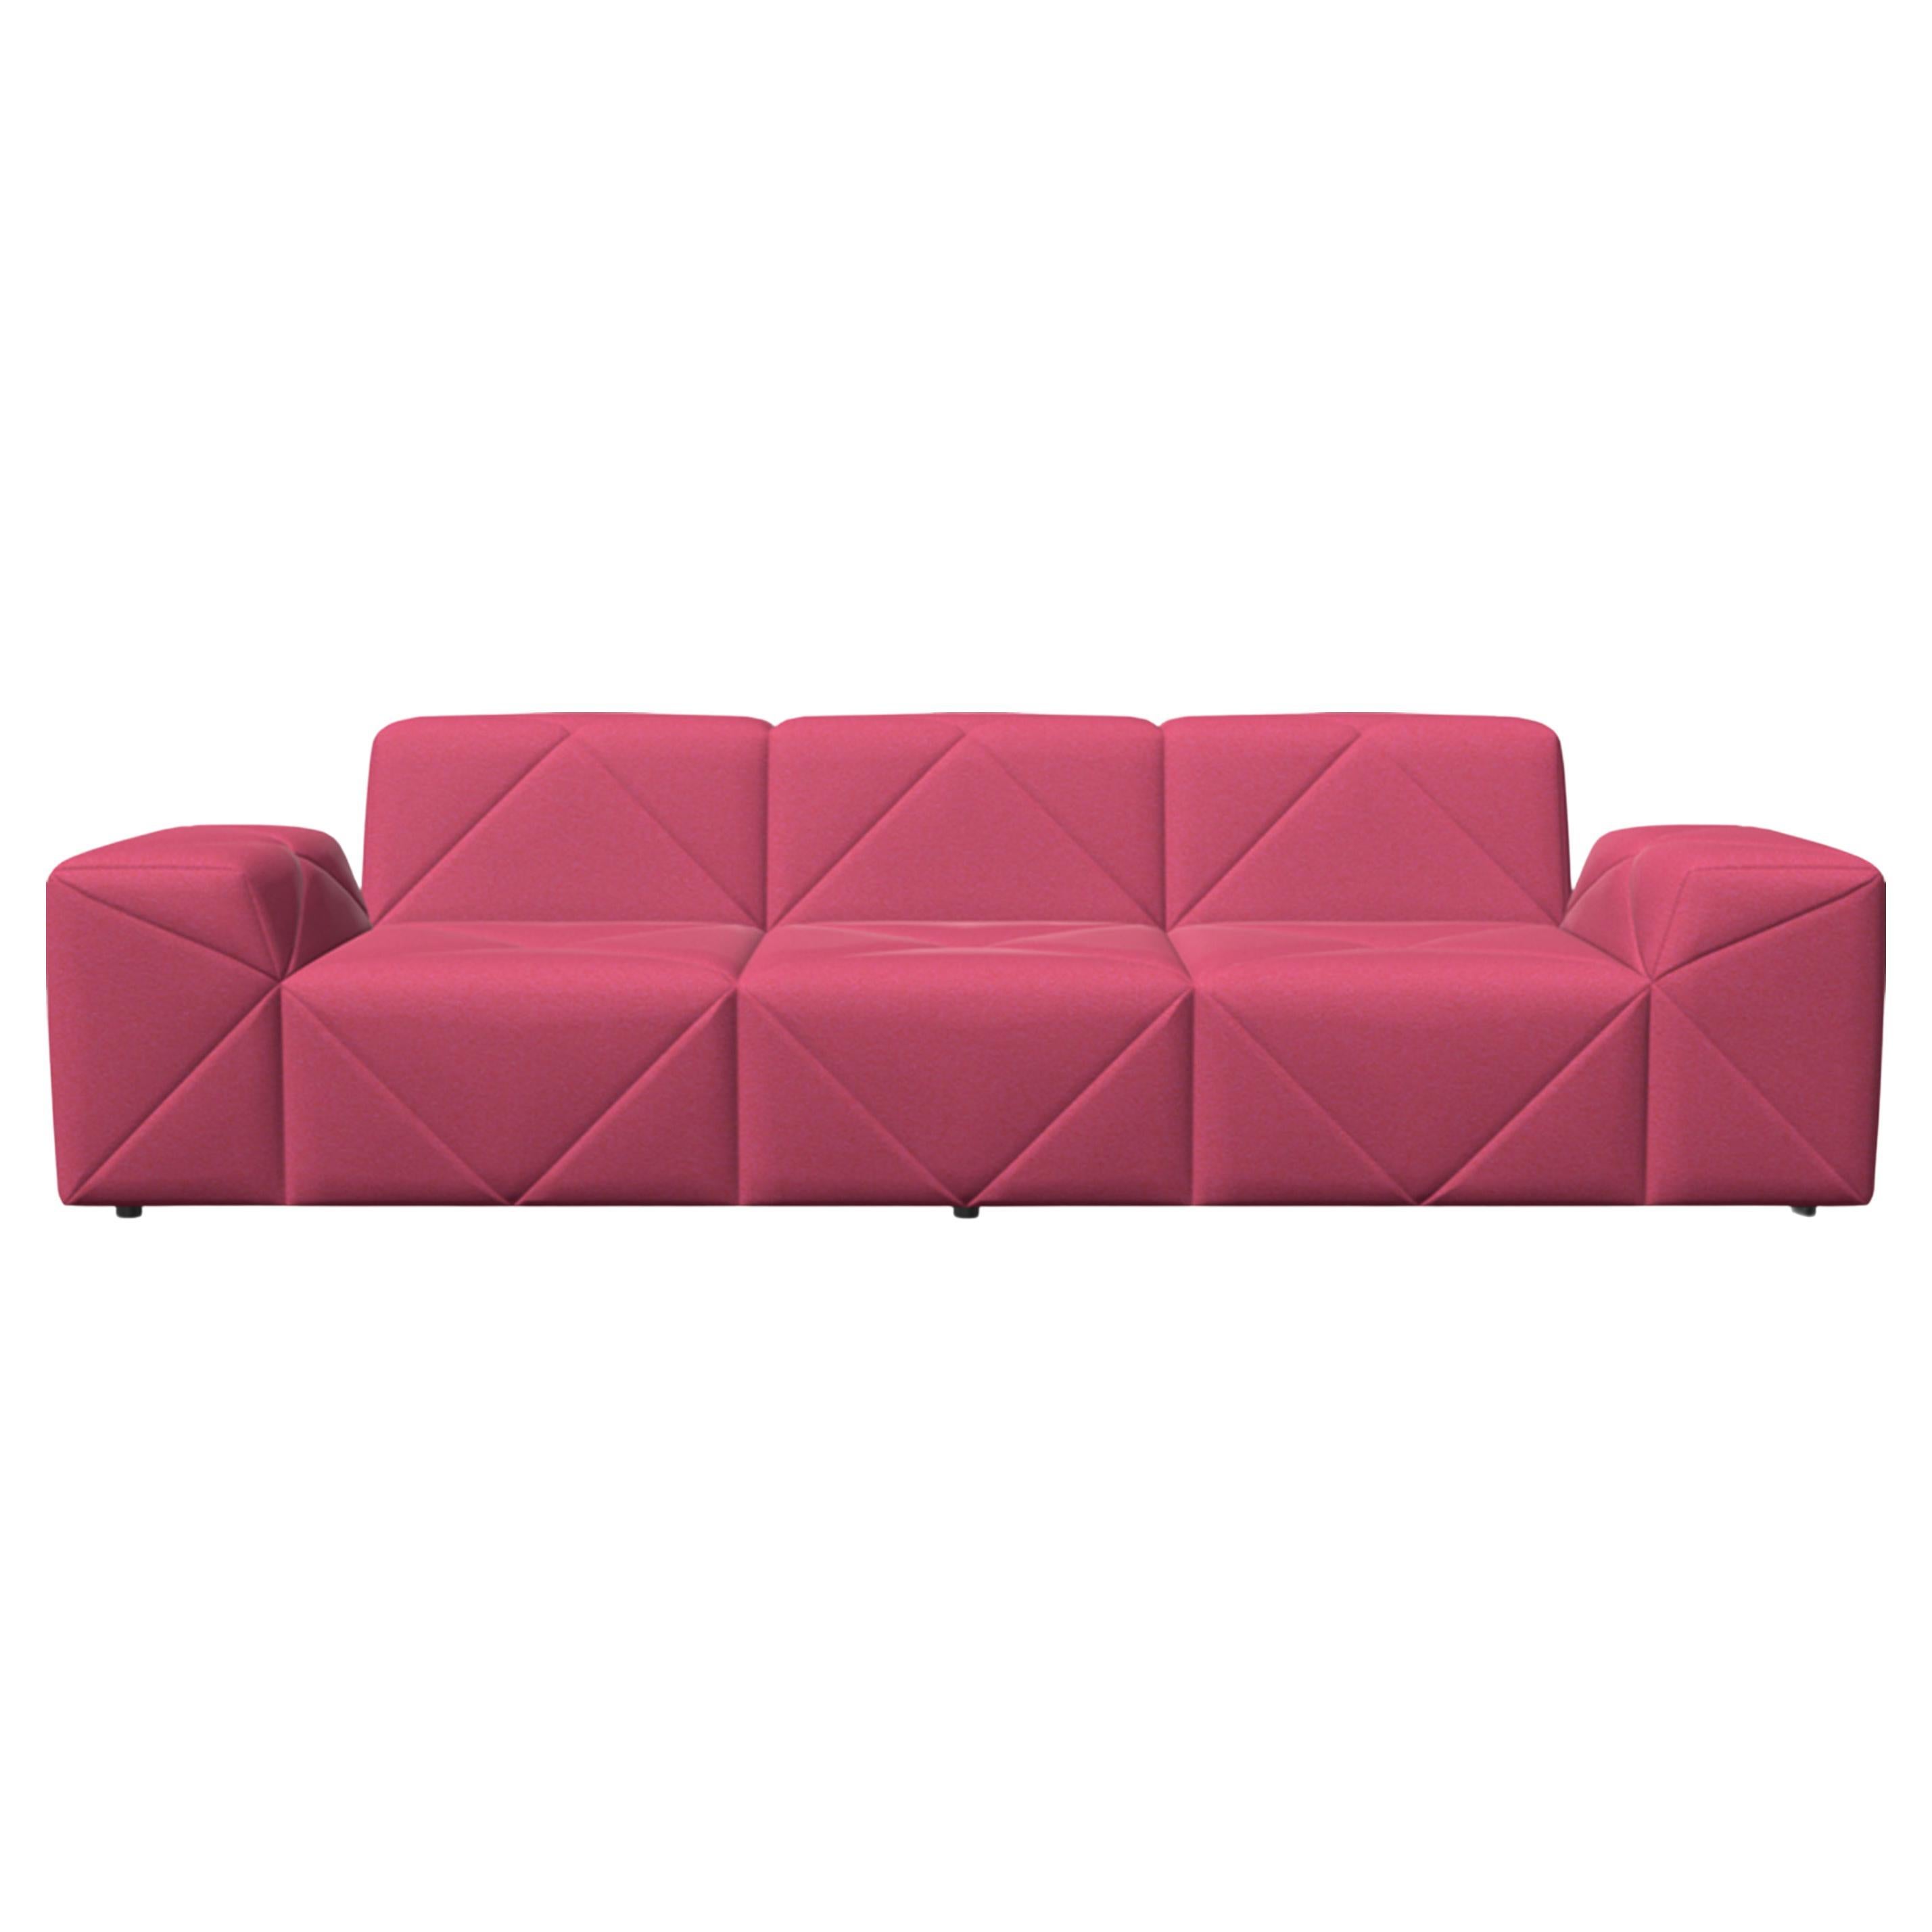 Moooi BFF Triple Seater TE01 Low Sofa in Divina 3, 626 Pink Upholstery For Sale